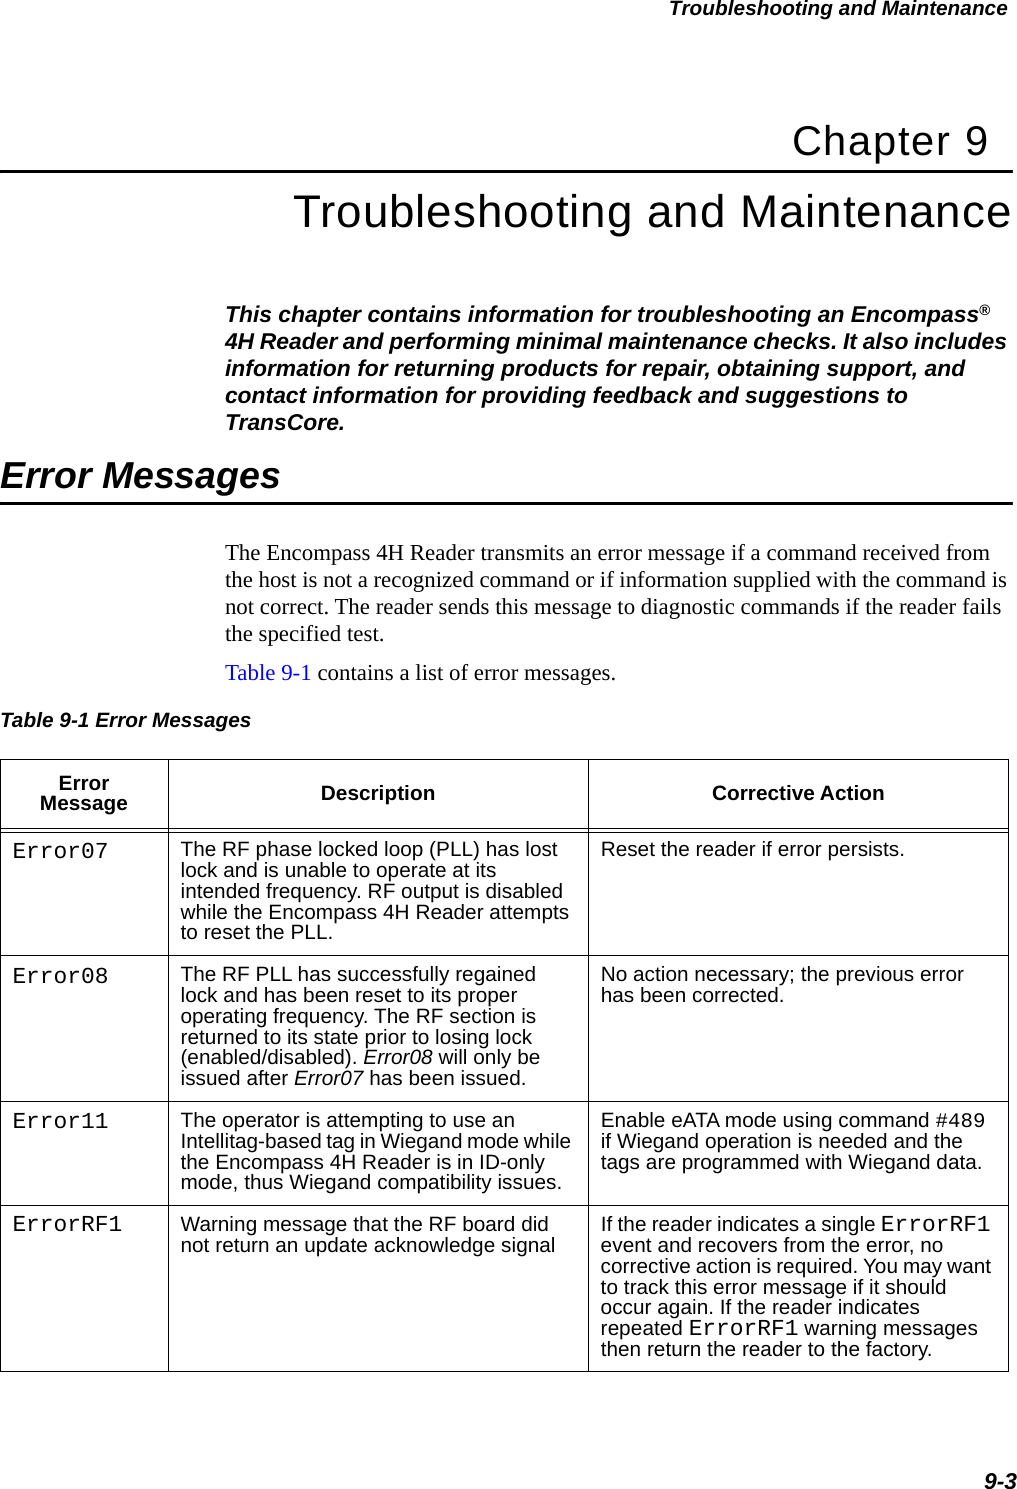 Troubleshooting and Maintenance9-3Chapter 9Troubleshooting and MaintenanceThis chapter contains information for troubleshooting an Encompass® 4H Reader and performing minimal maintenance checks. It also includes information for returning products for repair, obtaining support, and contact information for providing feedback and suggestions to TransCore. Error MessagesThe Encompass 4H Reader transmits an error message if a command received from the host is not a recognized command or if information supplied with the command is not correct. The reader sends this message to diagnostic commands if the reader fails the specified test.Table 9-1 contains a list of error messages. Table 9-1 Error Messages  Error Message Description Corrective ActionError07 The RF phase locked loop (PLL) has lost lock and is unable to operate at its intended frequency. RF output is disabled while the Encompass 4H Reader attempts to reset the PLL.Reset the reader if error persists.Error08 The RF PLL has successfully regained lock and has been reset to its proper operating frequency. The RF section is returned to its state prior to losing lock (enabled/disabled). Error08 will only be issued after Error07 has been issued.No action necessary; the previous error has been corrected.Error11 The operator is attempting to use an Intellitag-based tag in Wiegand mode while the Encompass 4H Reader is in ID-only mode, thus Wiegand compatibility issues.Enable eATA mode using command #489 if Wiegand operation is needed and the tags are programmed with Wiegand data.ErrorRF1 Warning message that the RF board did not return an update acknowledge signal If the reader indicates a single ErrorRF1 event and recovers from the error, no corrective action is required. You may want to track this error message if it should occur again. If the reader indicates repeated ErrorRF1 warning messages then return the reader to the factory.